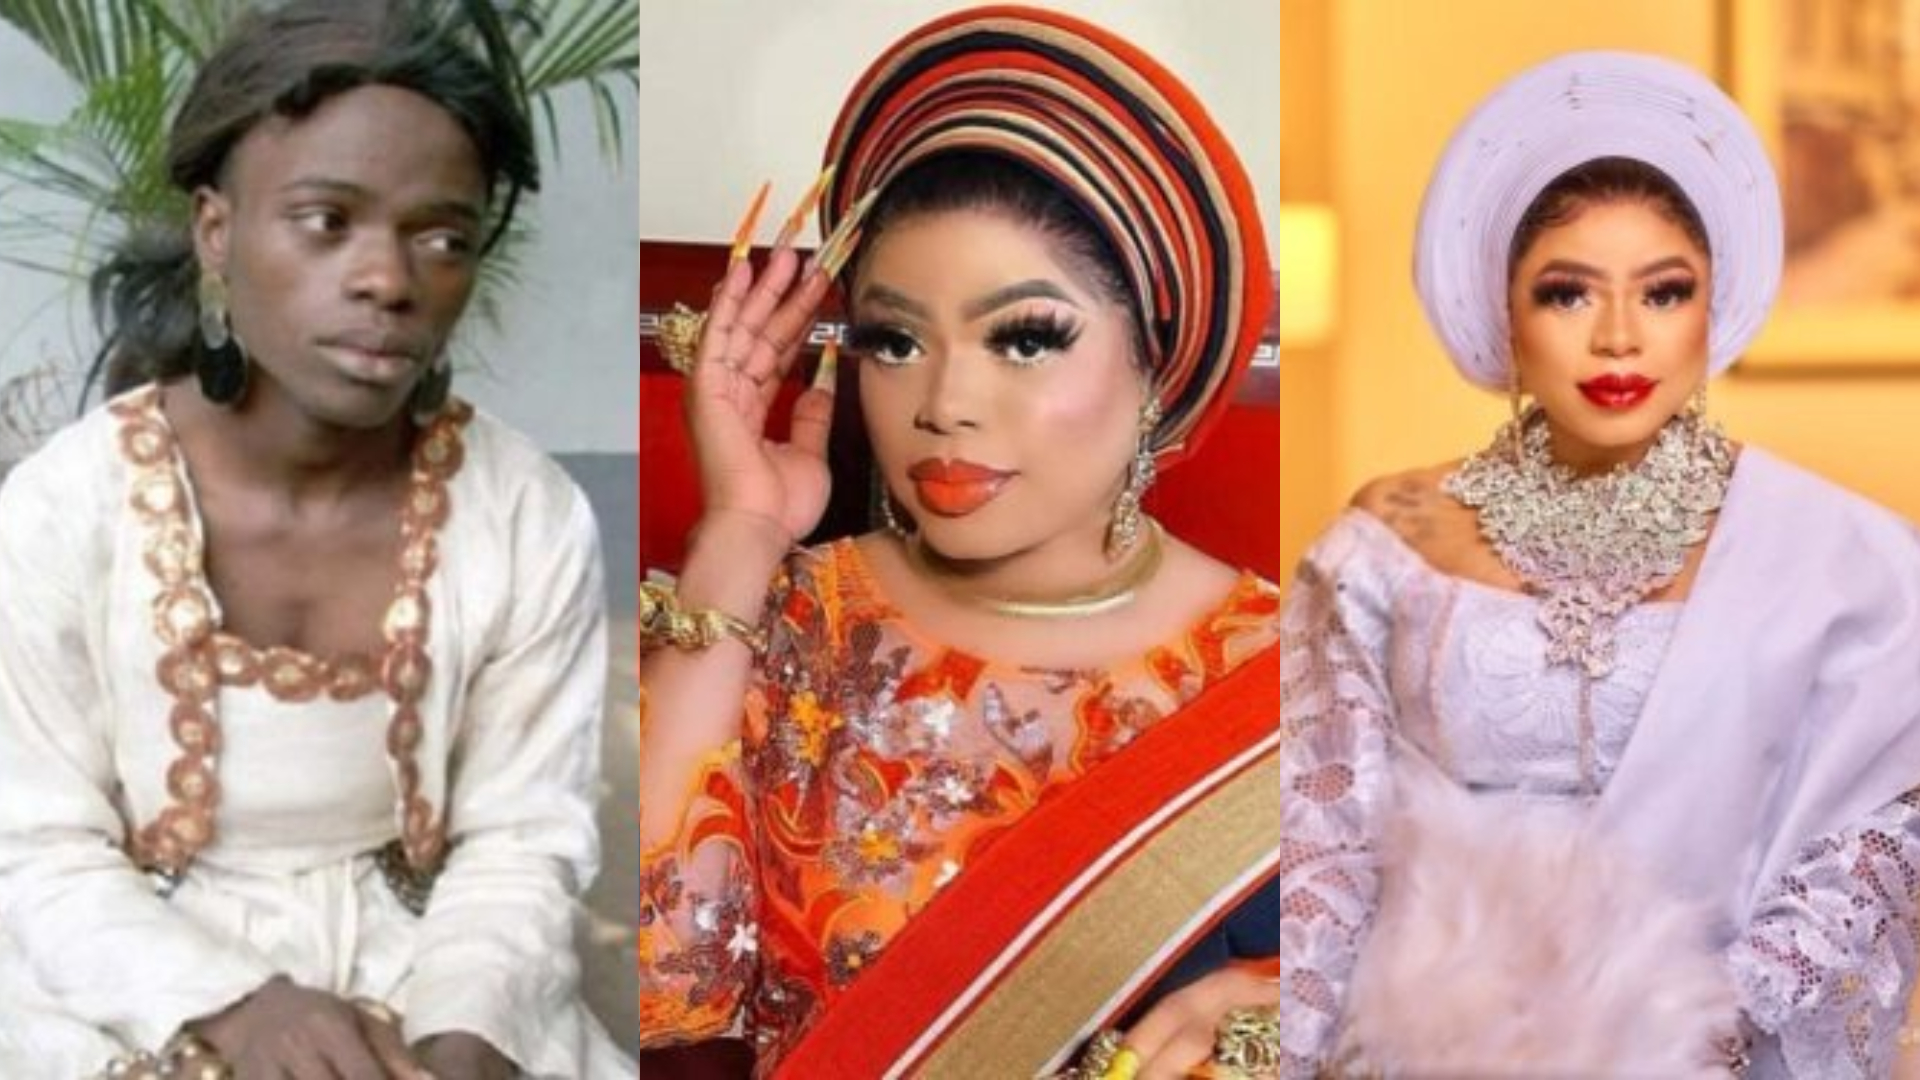 "I have always known I will be a woman upon maturity" – Bobrisky spills